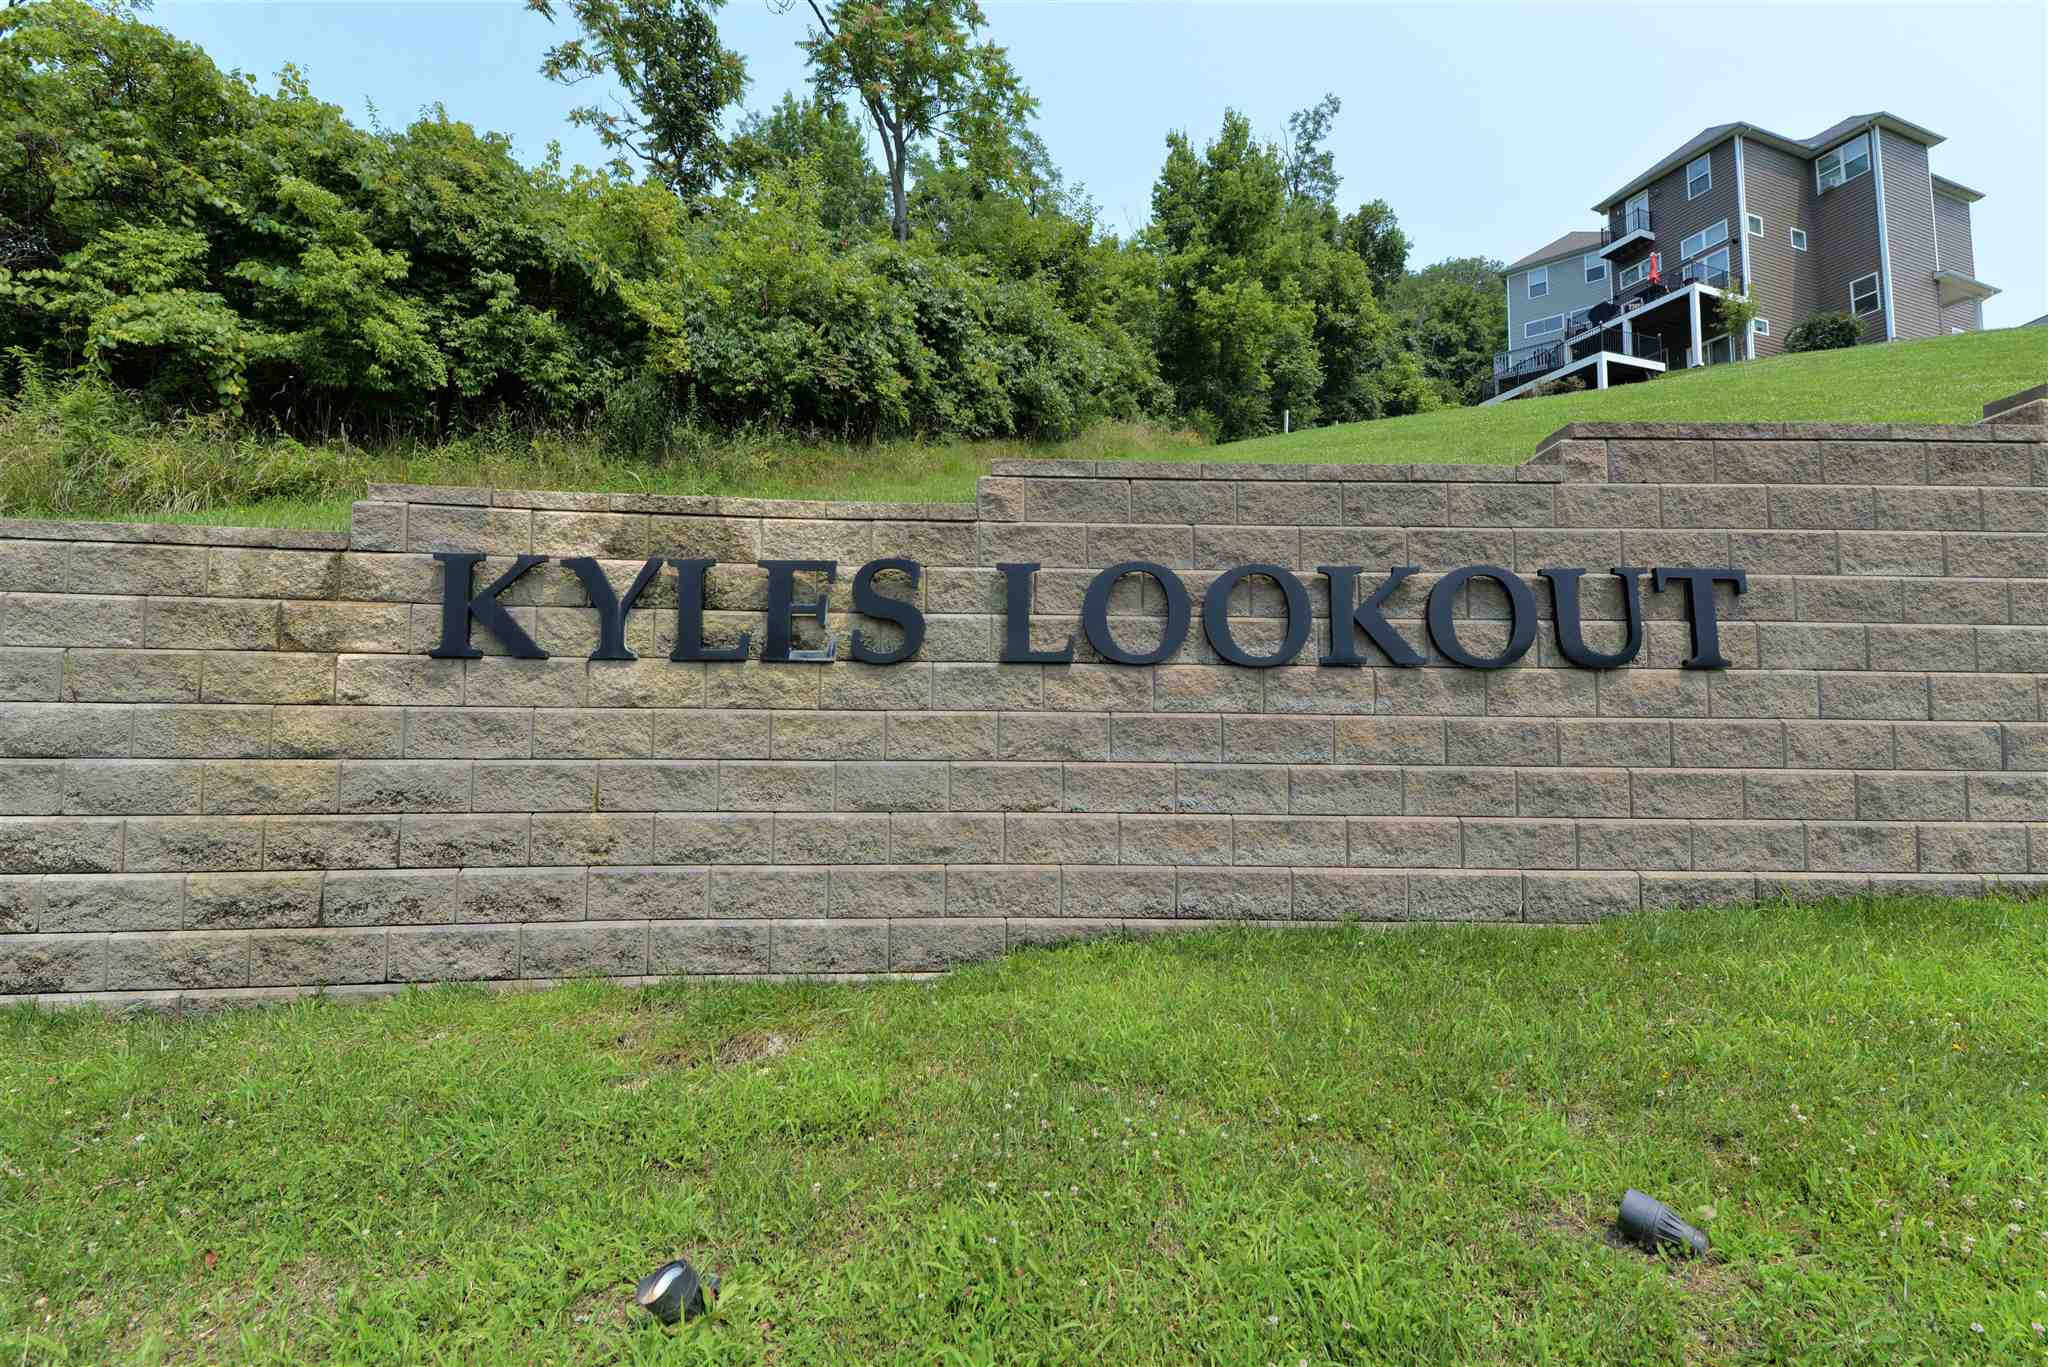 Kyles Lookout Fort Wright, KY